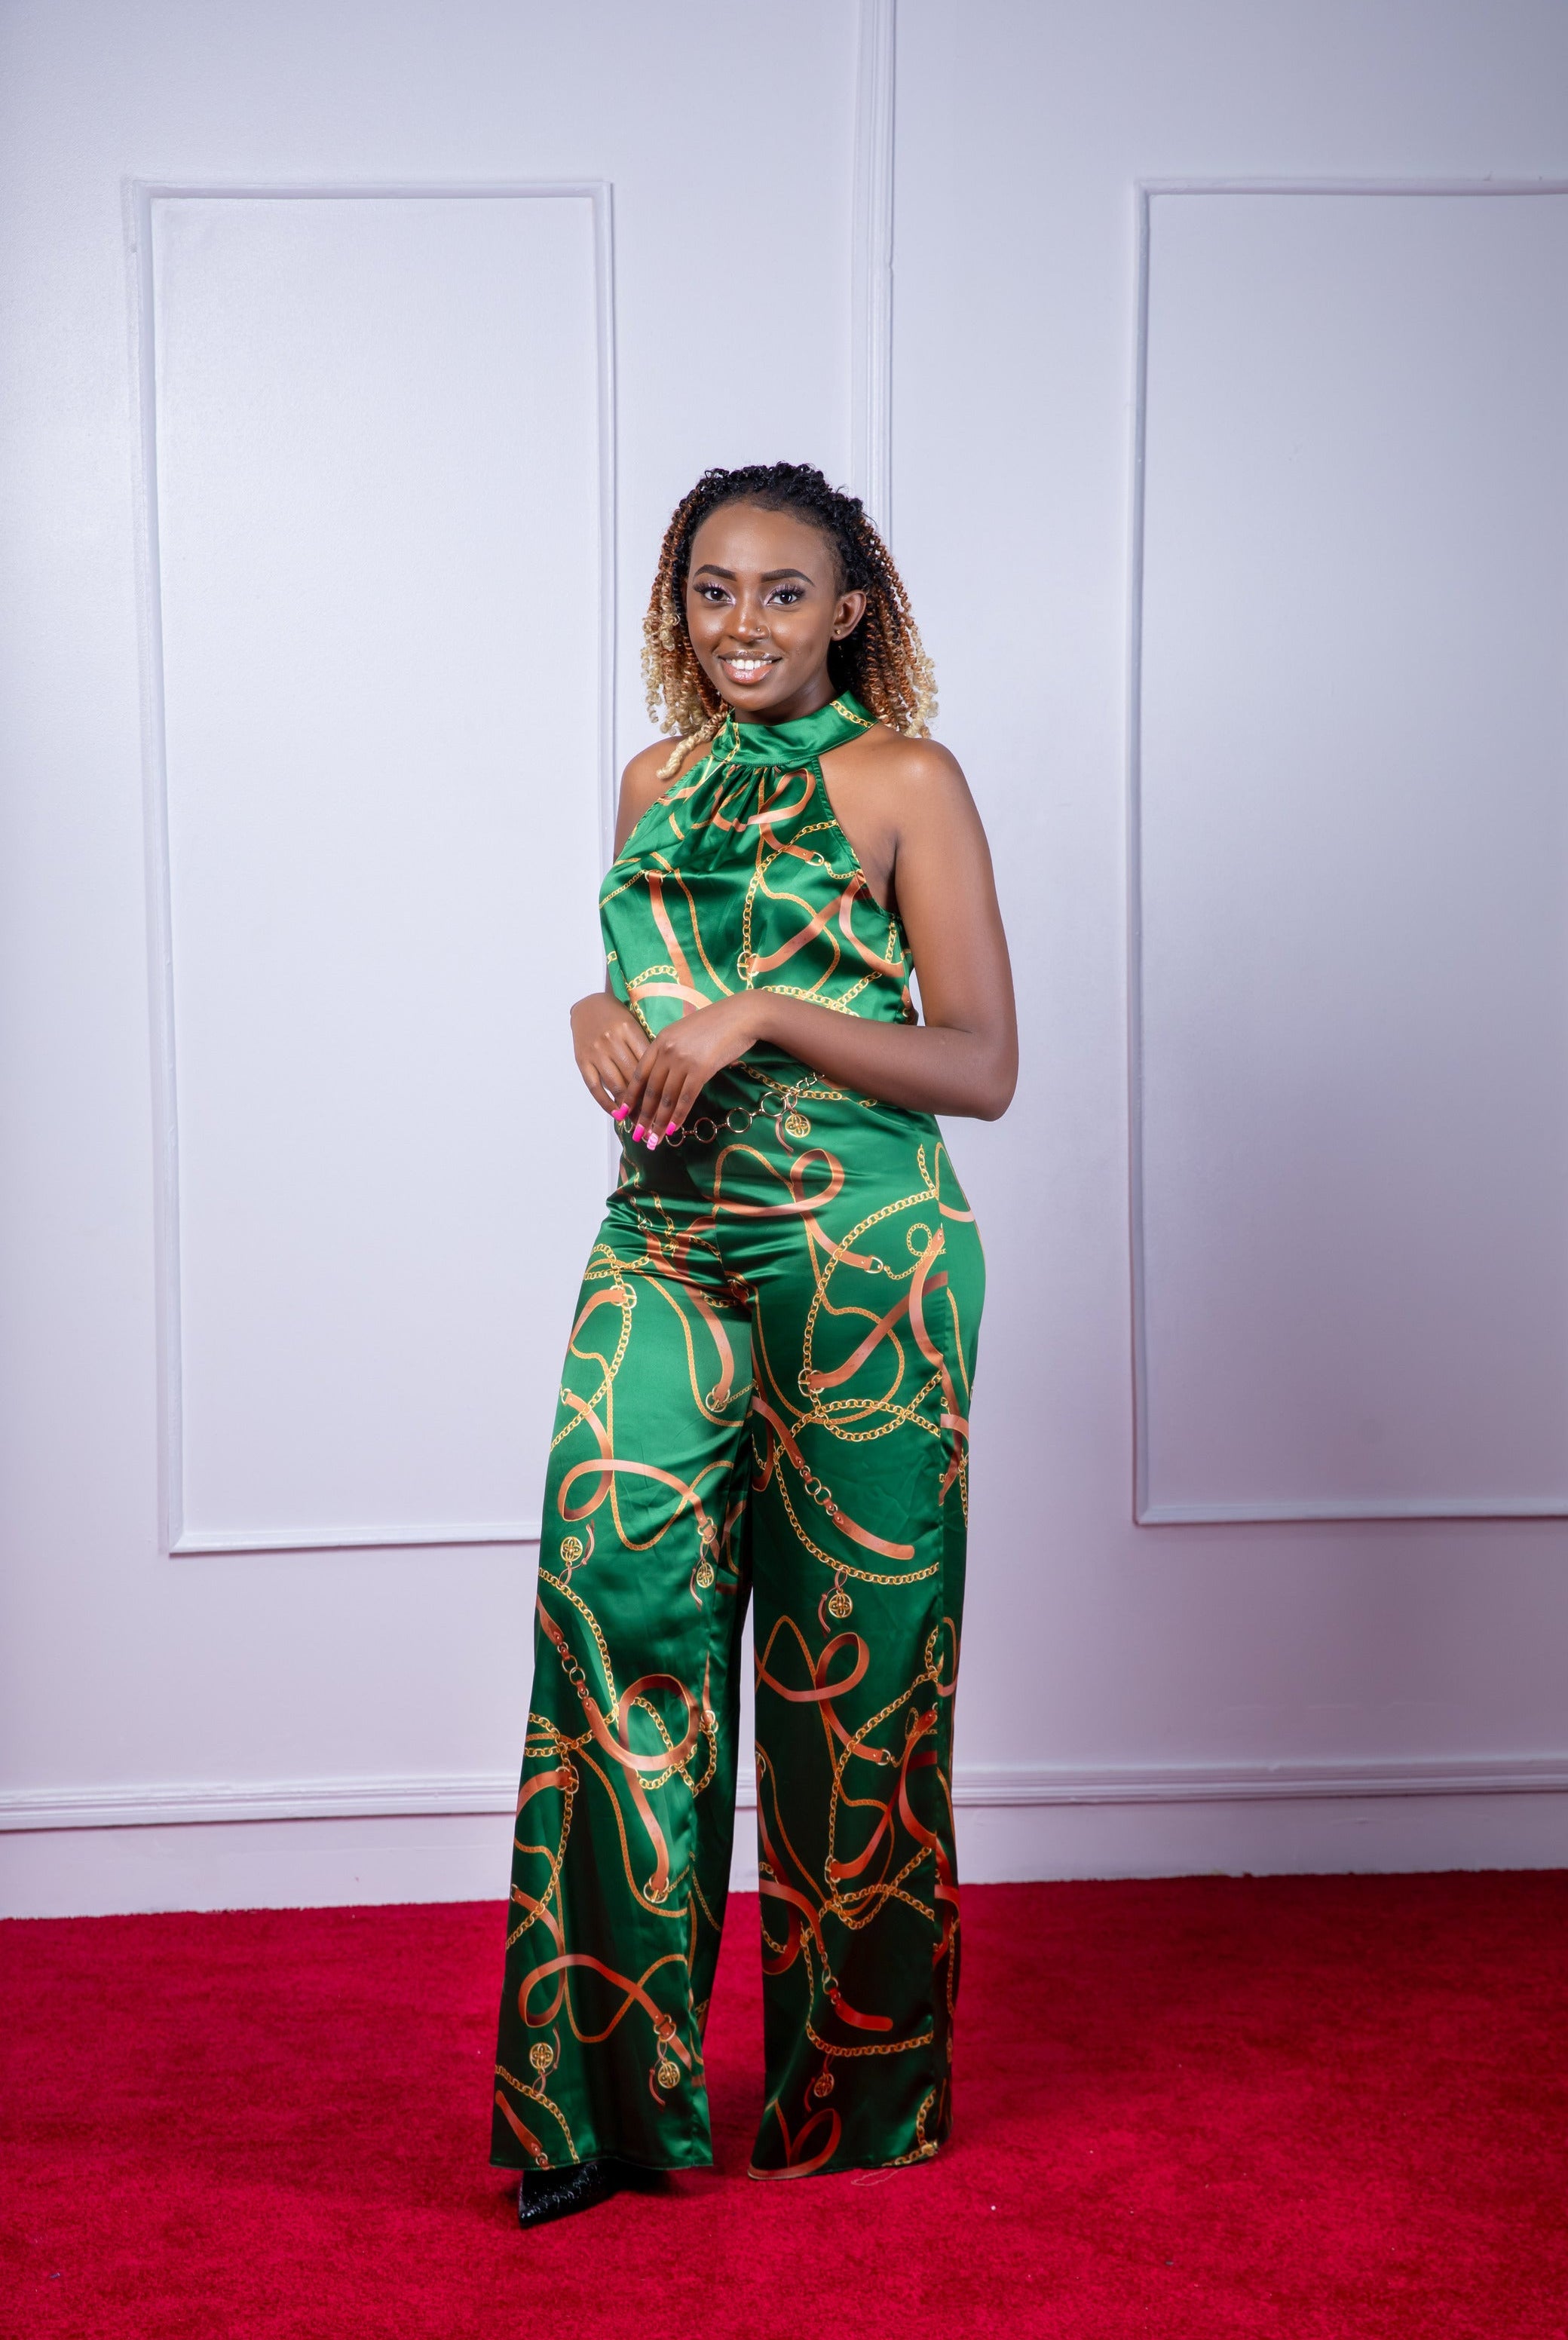 Ariana Grande Jump Suit - Green Chain - Shop Kenya - Affordable Fashion Ariana Grande Jump Suit - Green Chain hiiii_style Jumpsuits & Rompers copy-of-ariana-grande-jump-suit-3 _sami.c, ariana jean offer, Fervente Chinese Collar, Fervente Chinese Collarr, winnie_njenga, woman Shop Kenya - Affordable Fashion